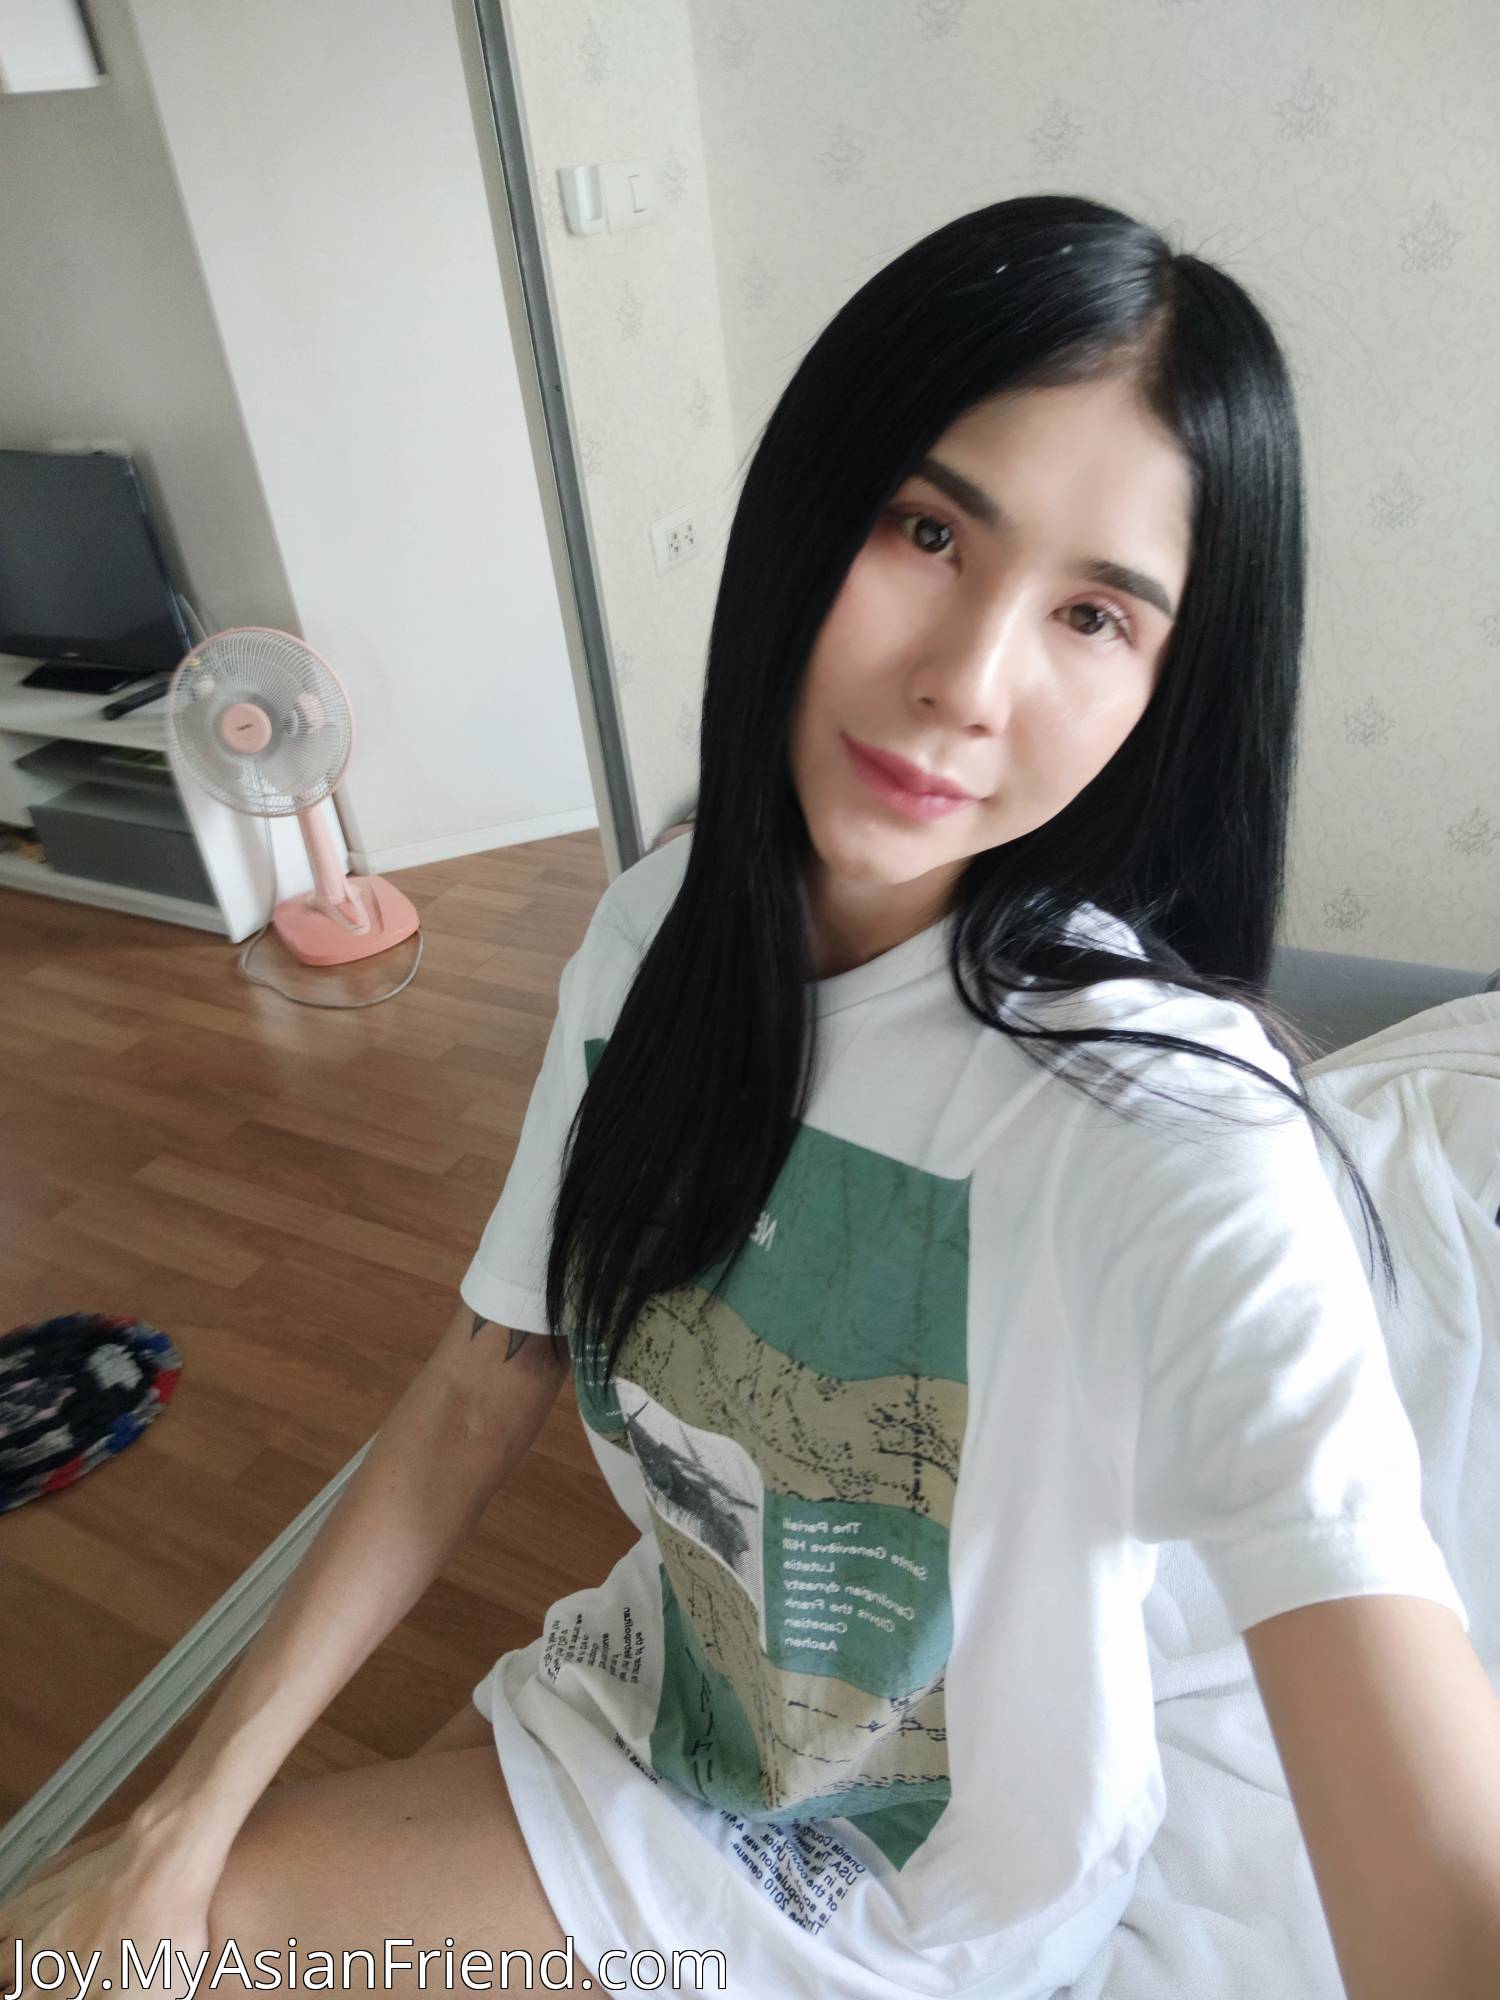 Joy's personal blog photo 1 added Monday the 12th of September 2022